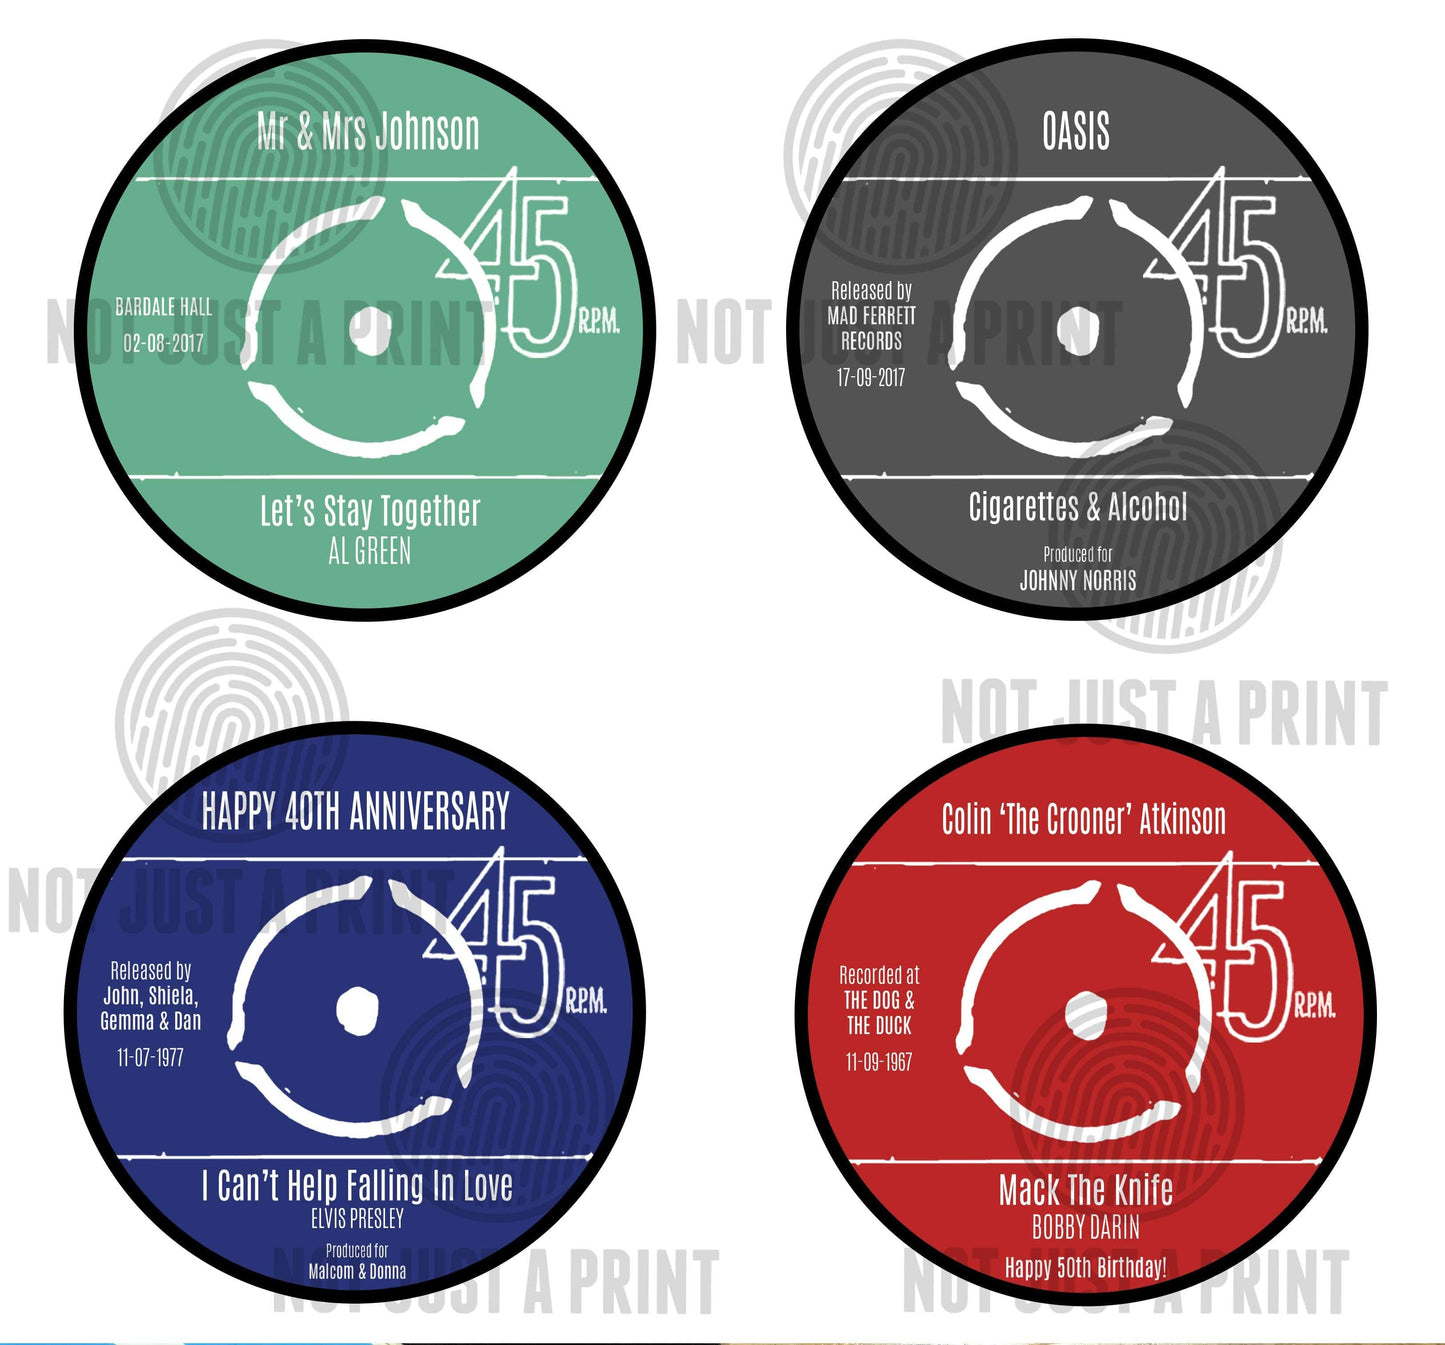 Vinyl record coasters showing details of someone's wedding